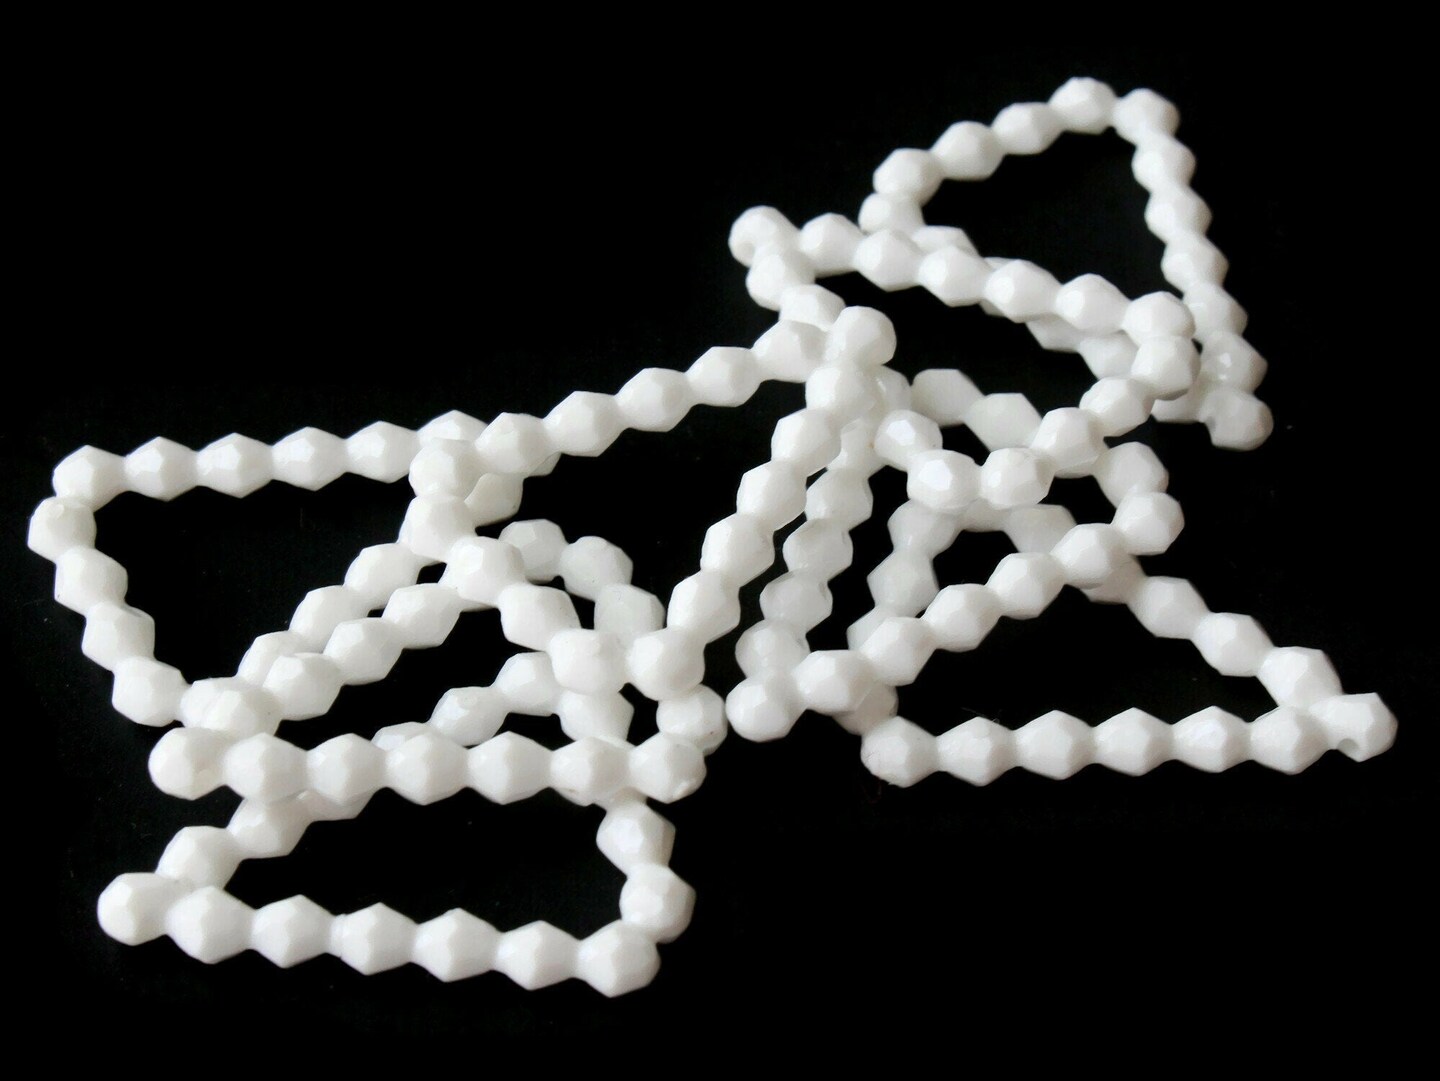 8 31mm White Vintage Plastic Open Bumpy Triangle Beads